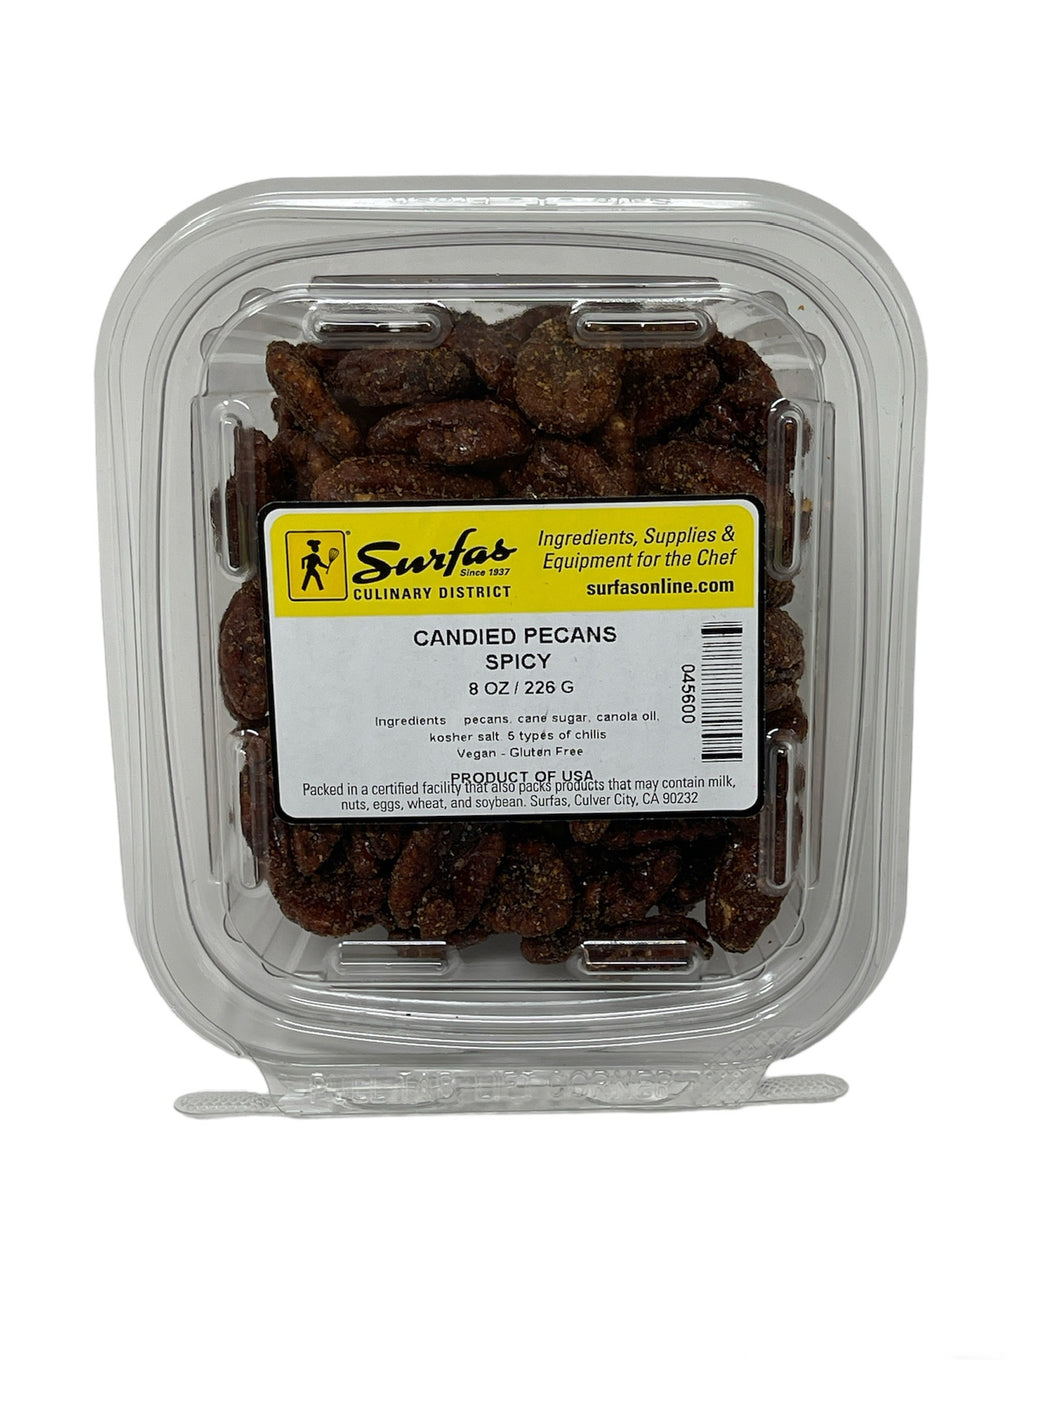 Candied Pecans Spicy 8oz